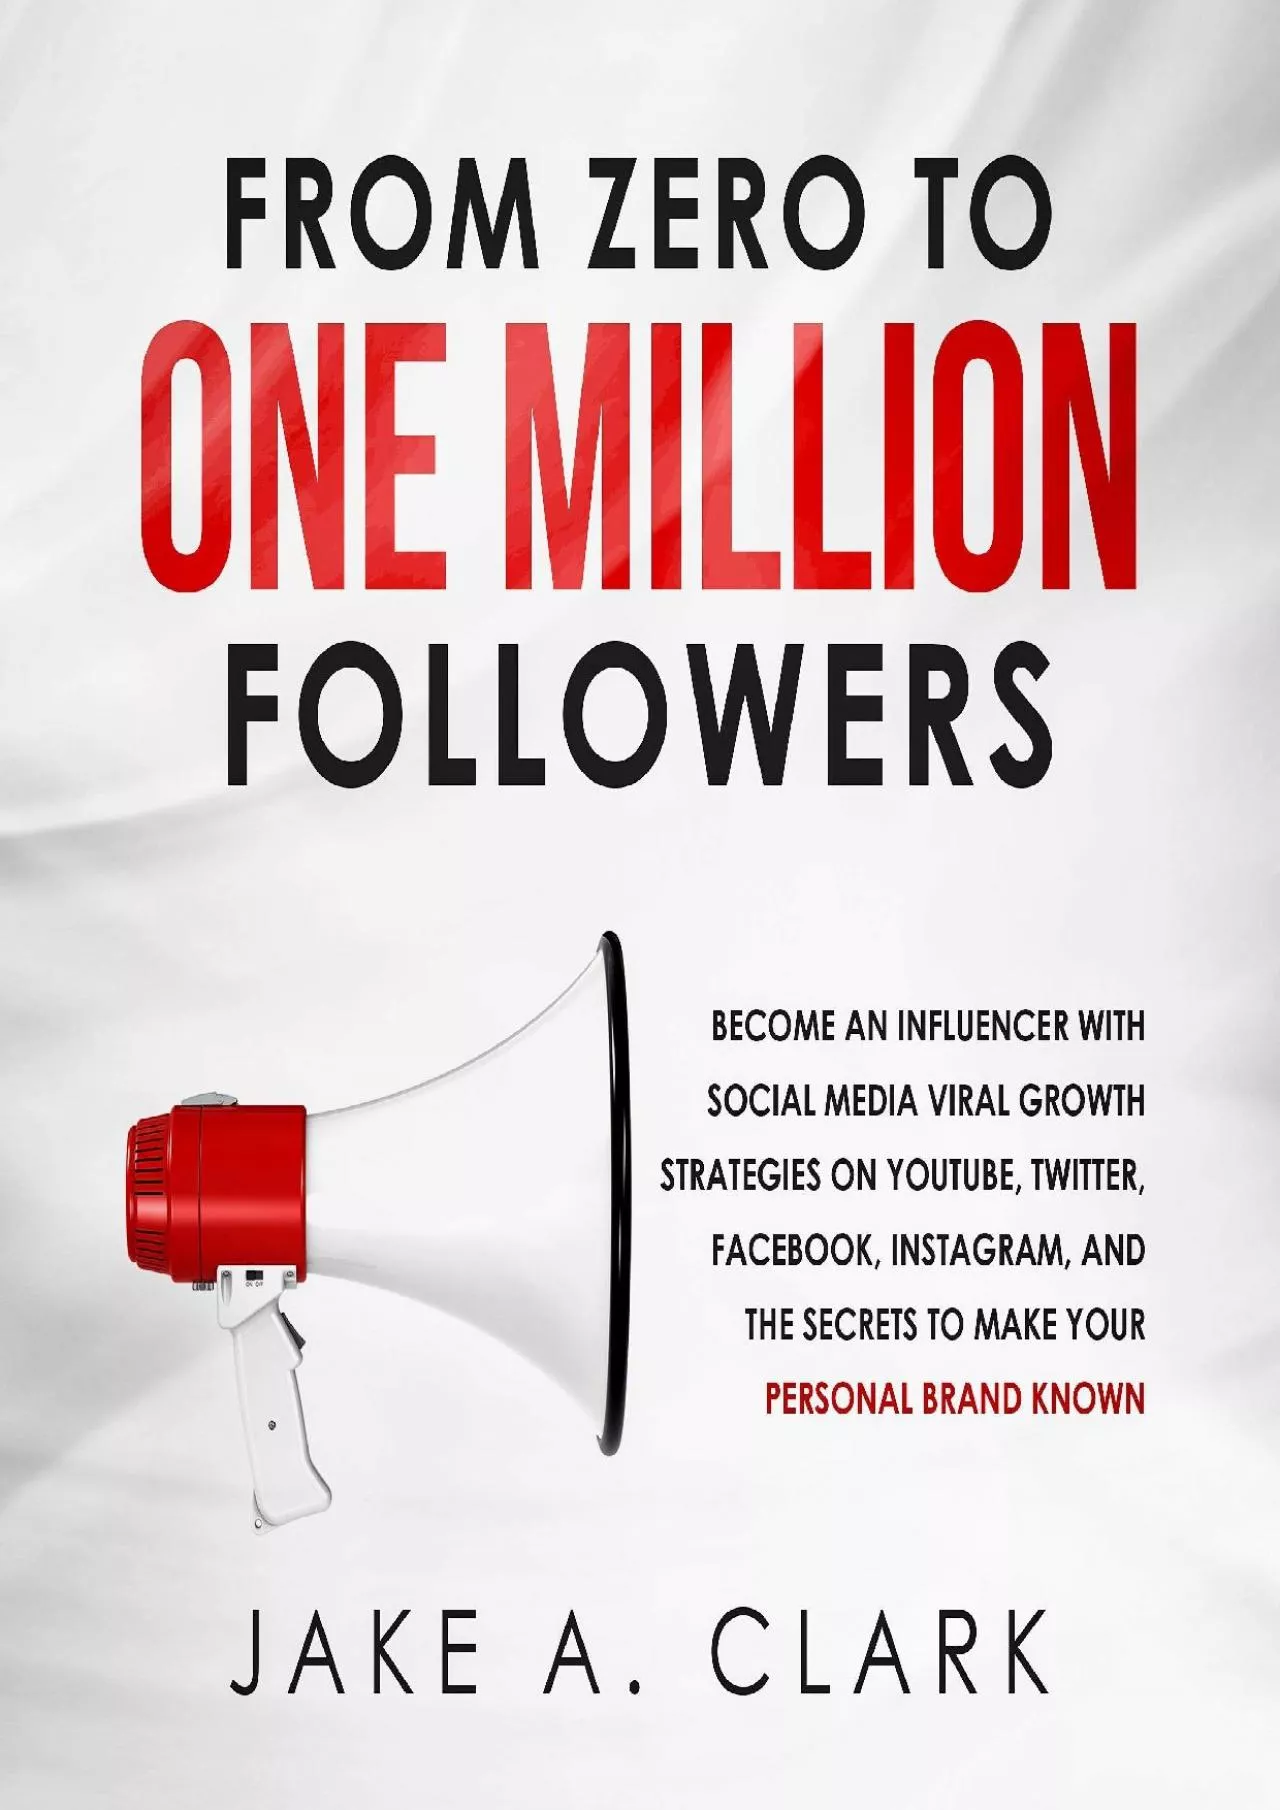 Zero to One Million Followers Become an Influencer with Social Media Viral Growth Strategies